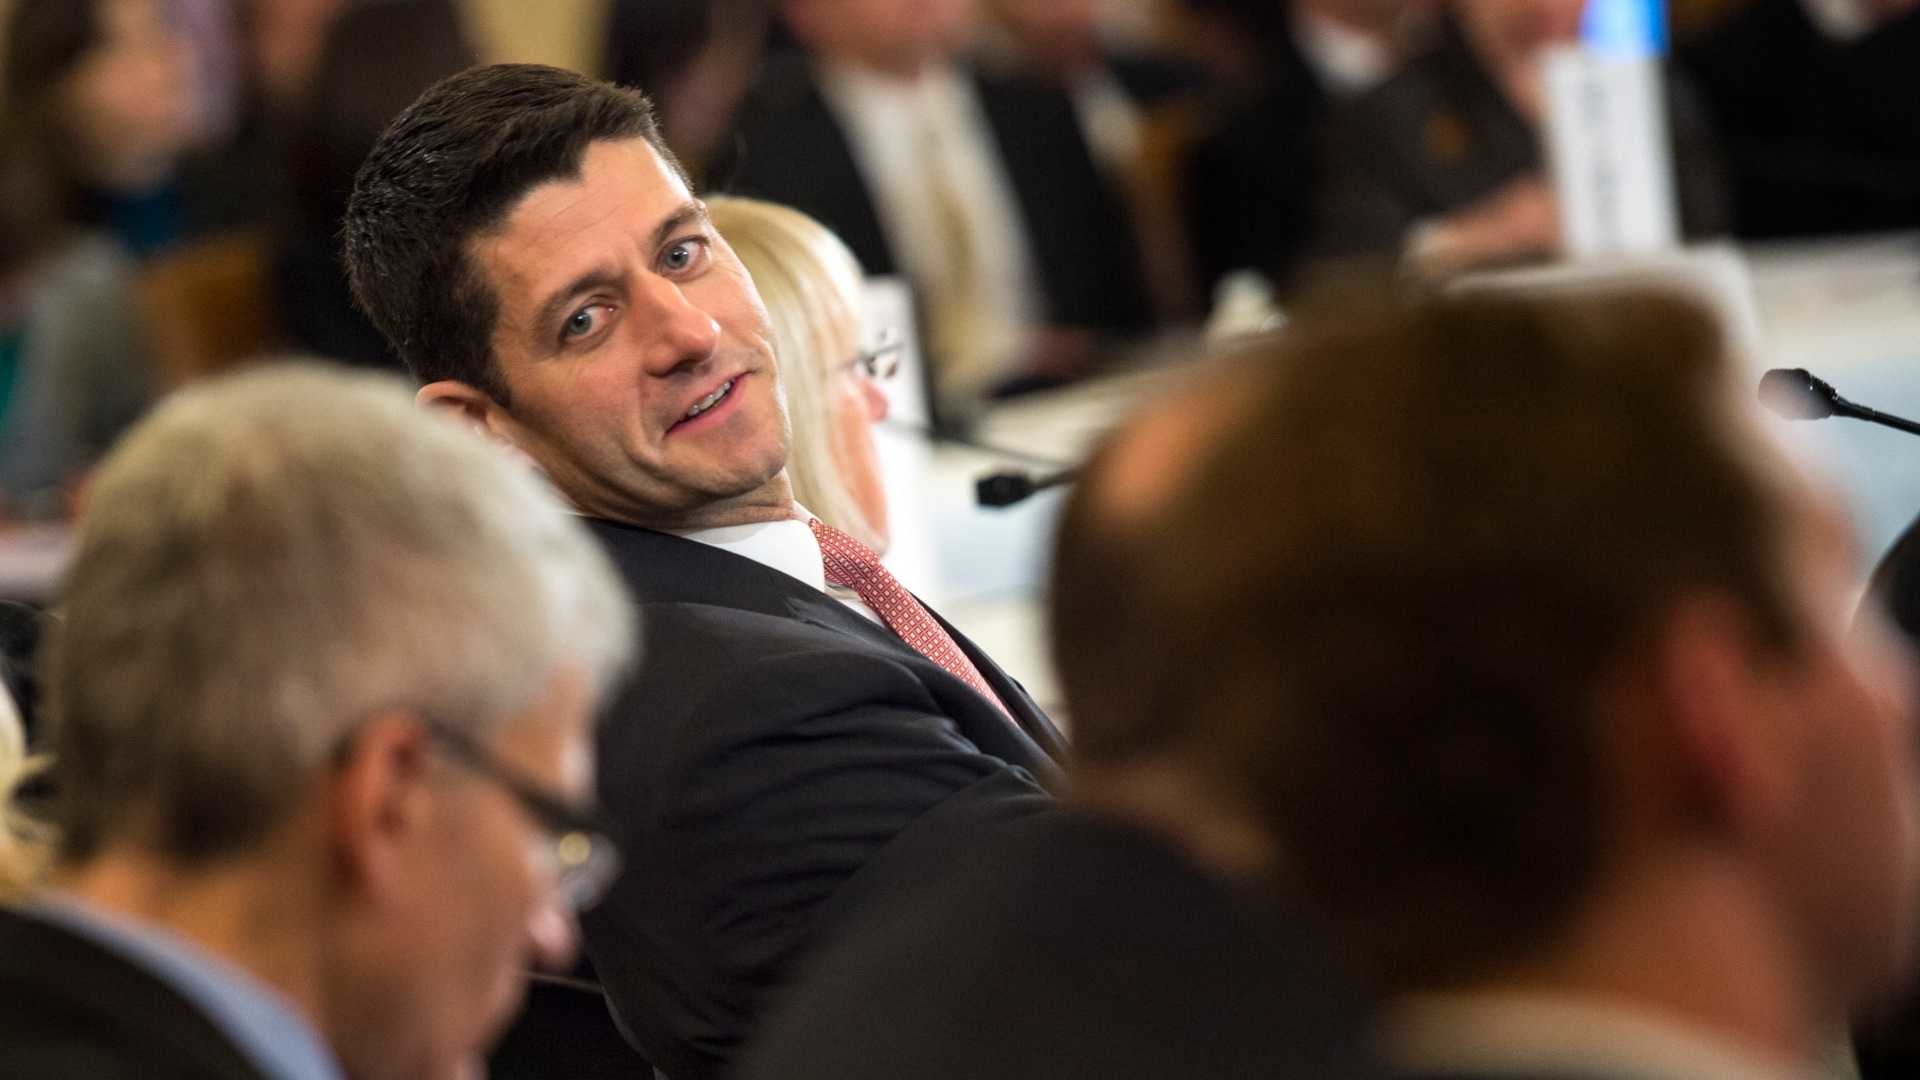 1920x1080 Related Wallpapers from Michelle Branch. House approves Ryan plan to cut  budget $5 trillion - The Washington Post